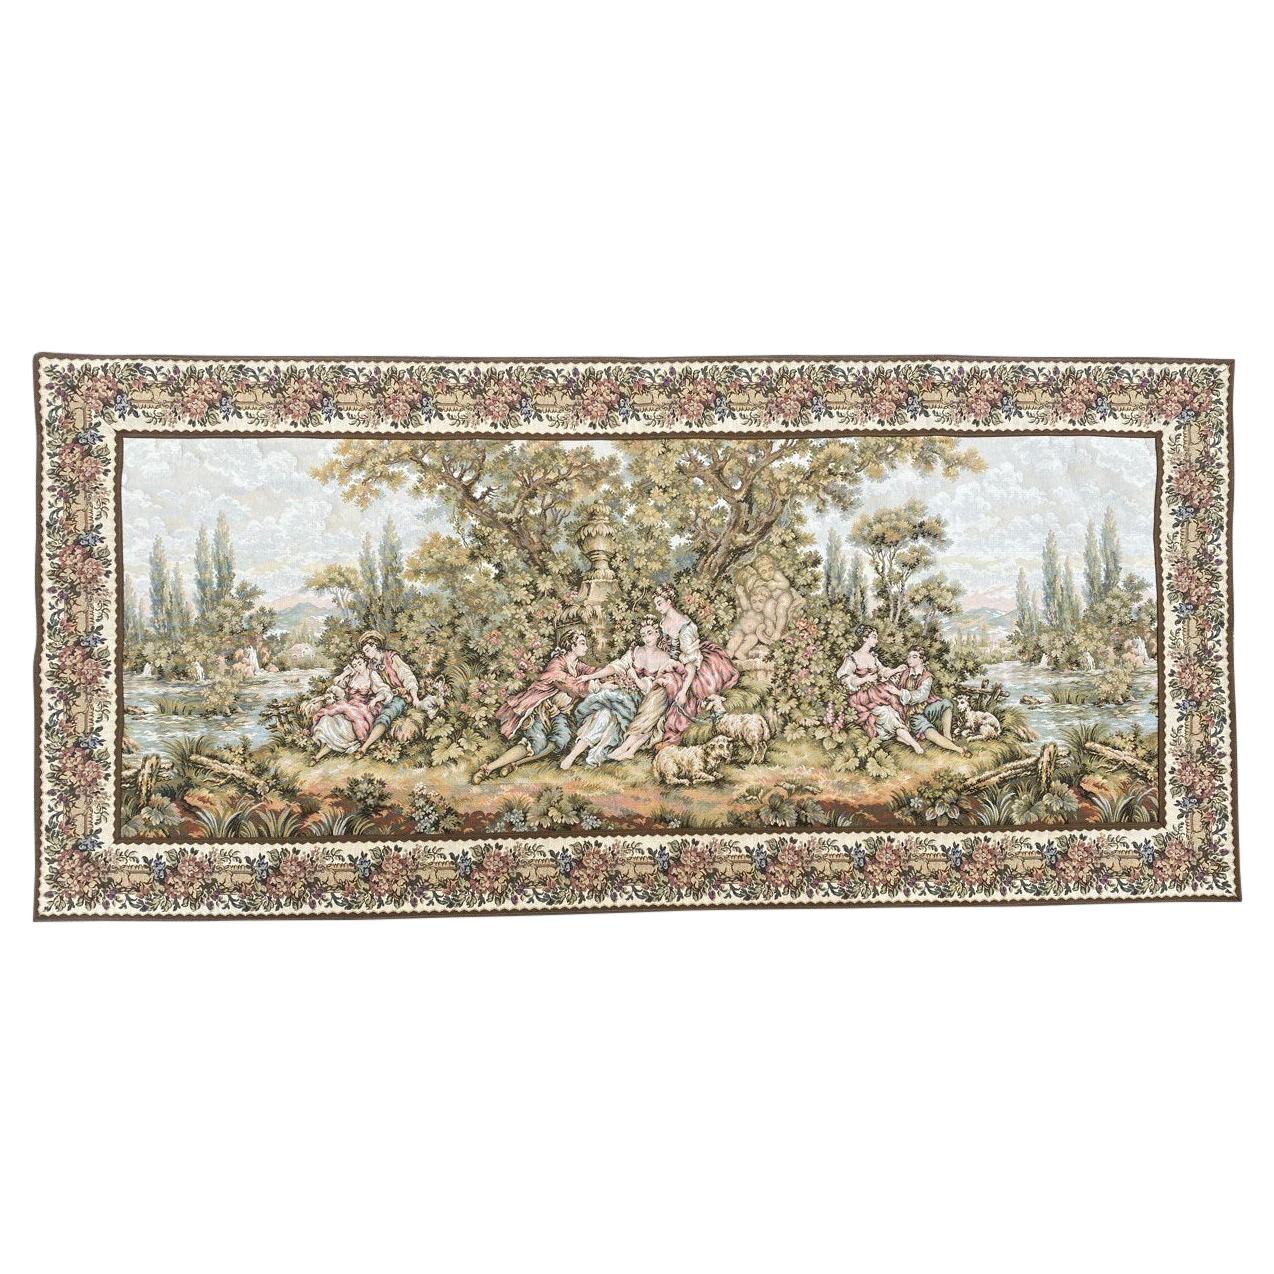 Bobyrug's Beautiful Aubusson French Style Jaquar Tapestry (Tapisserie d'Aubusson)